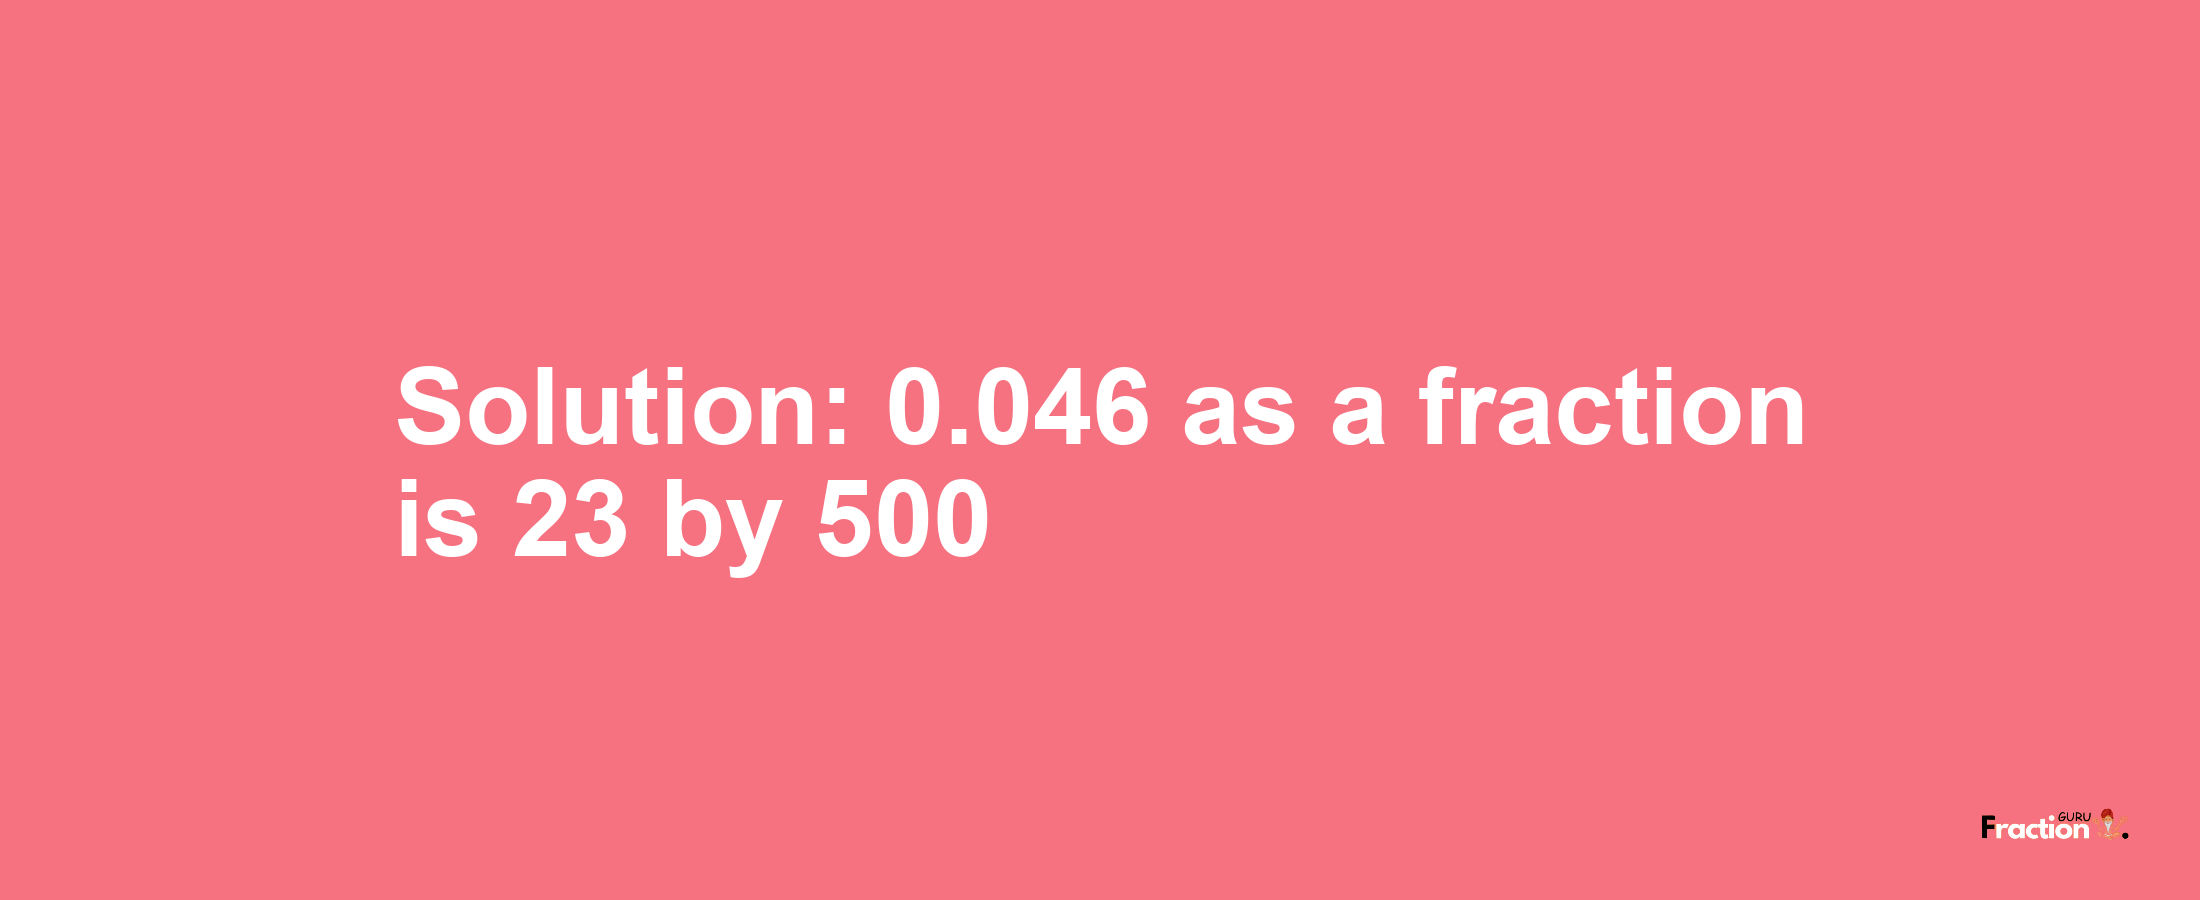 Solution:0.046 as a fraction is 23/500